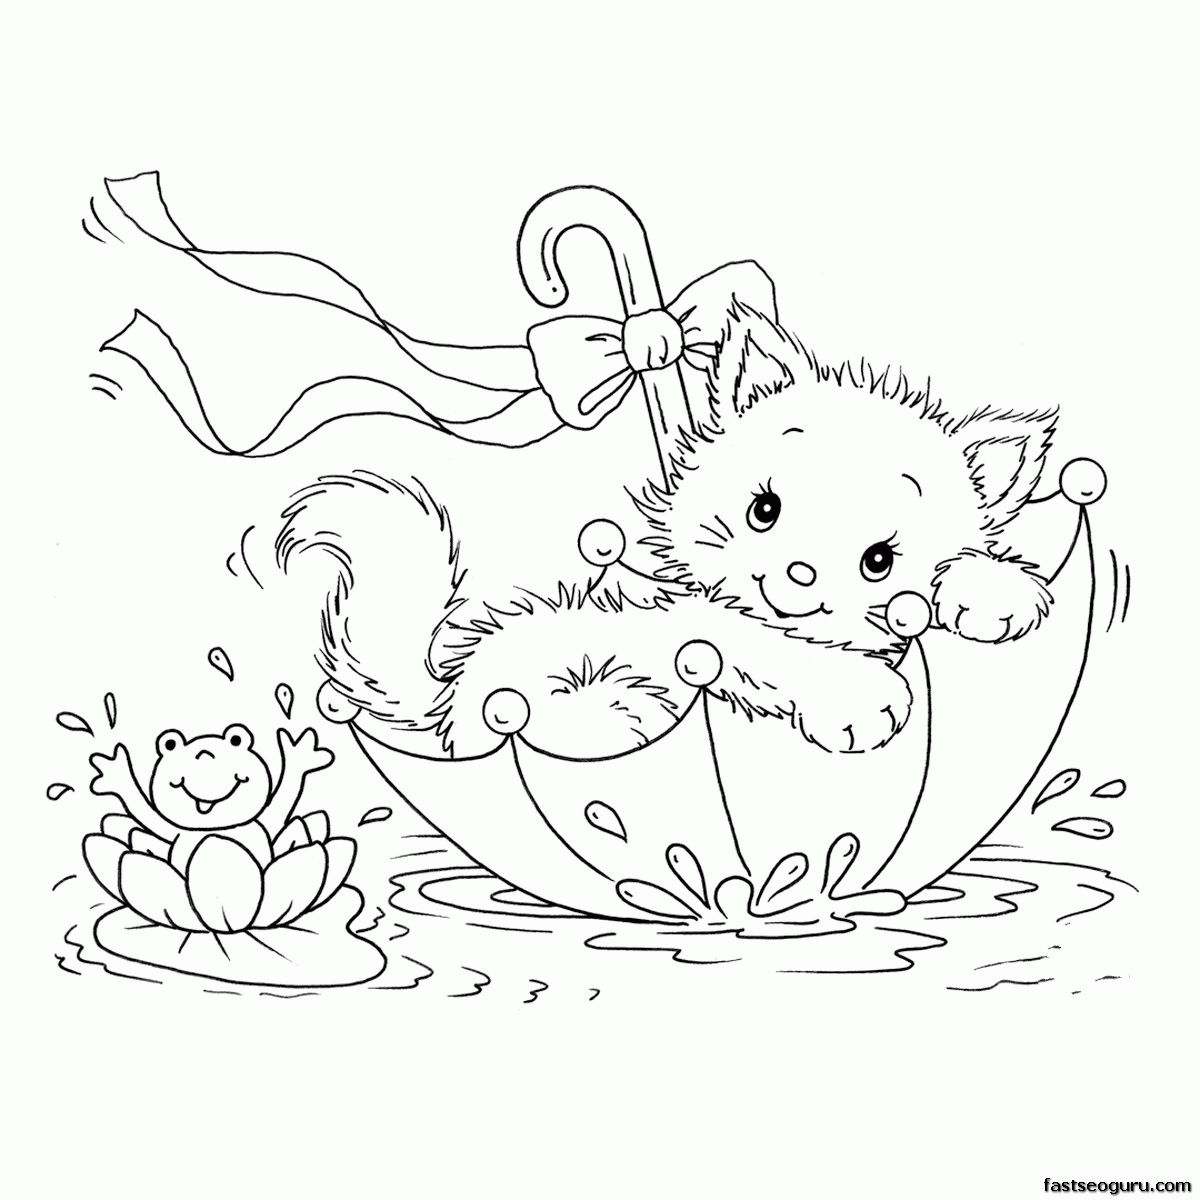 kitty cat coloring page - High Quality Coloring Pages